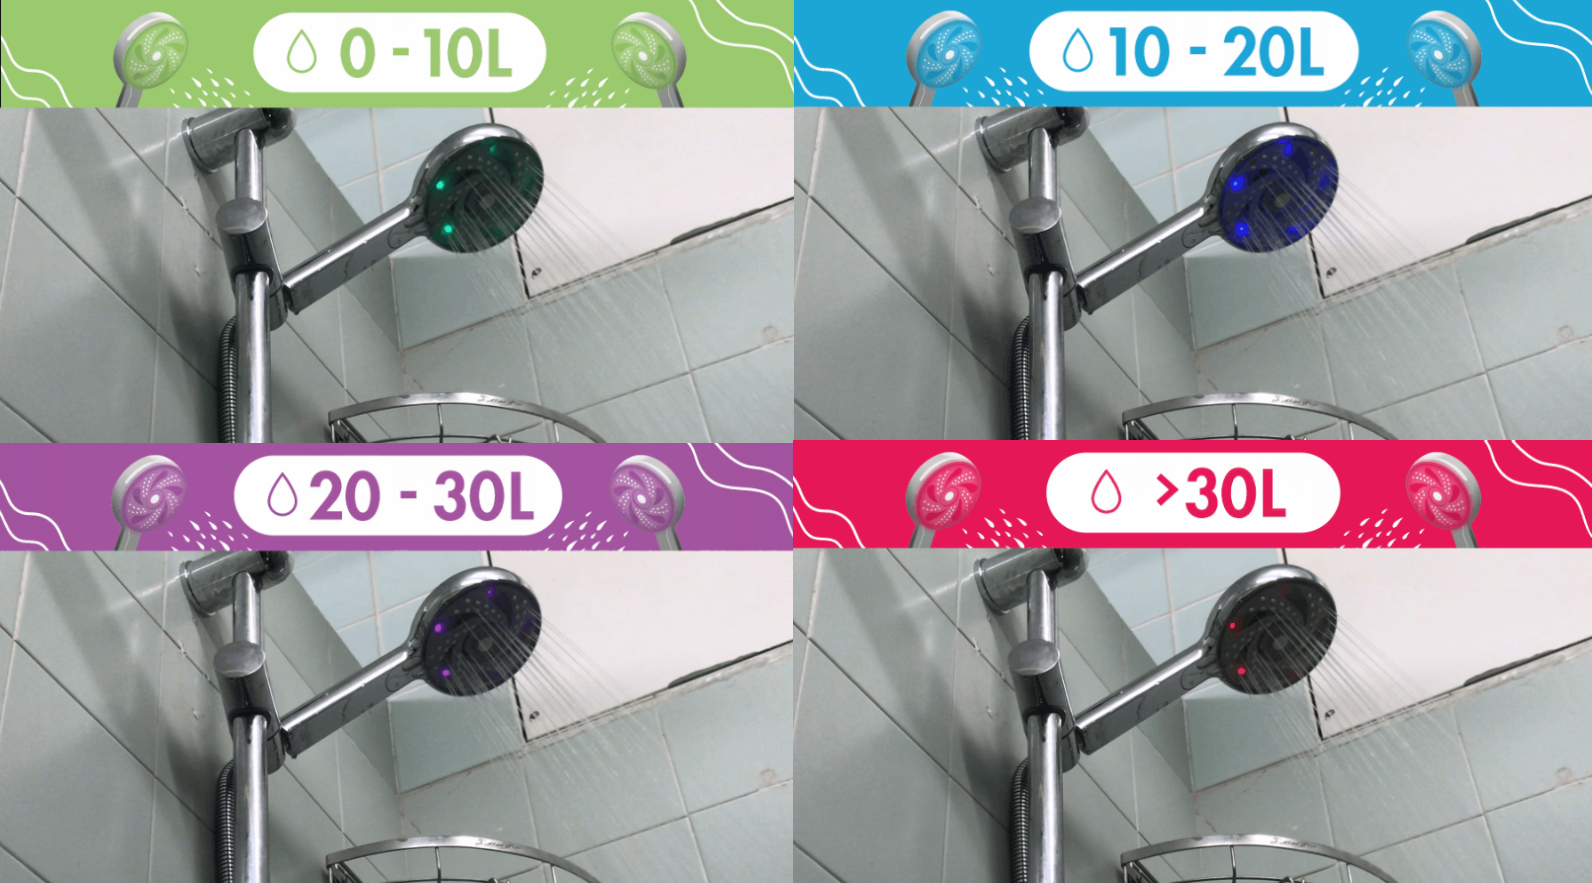 The smart showerhead is equipped with an integrated water-powered LED light that changes color in line with actual water usage